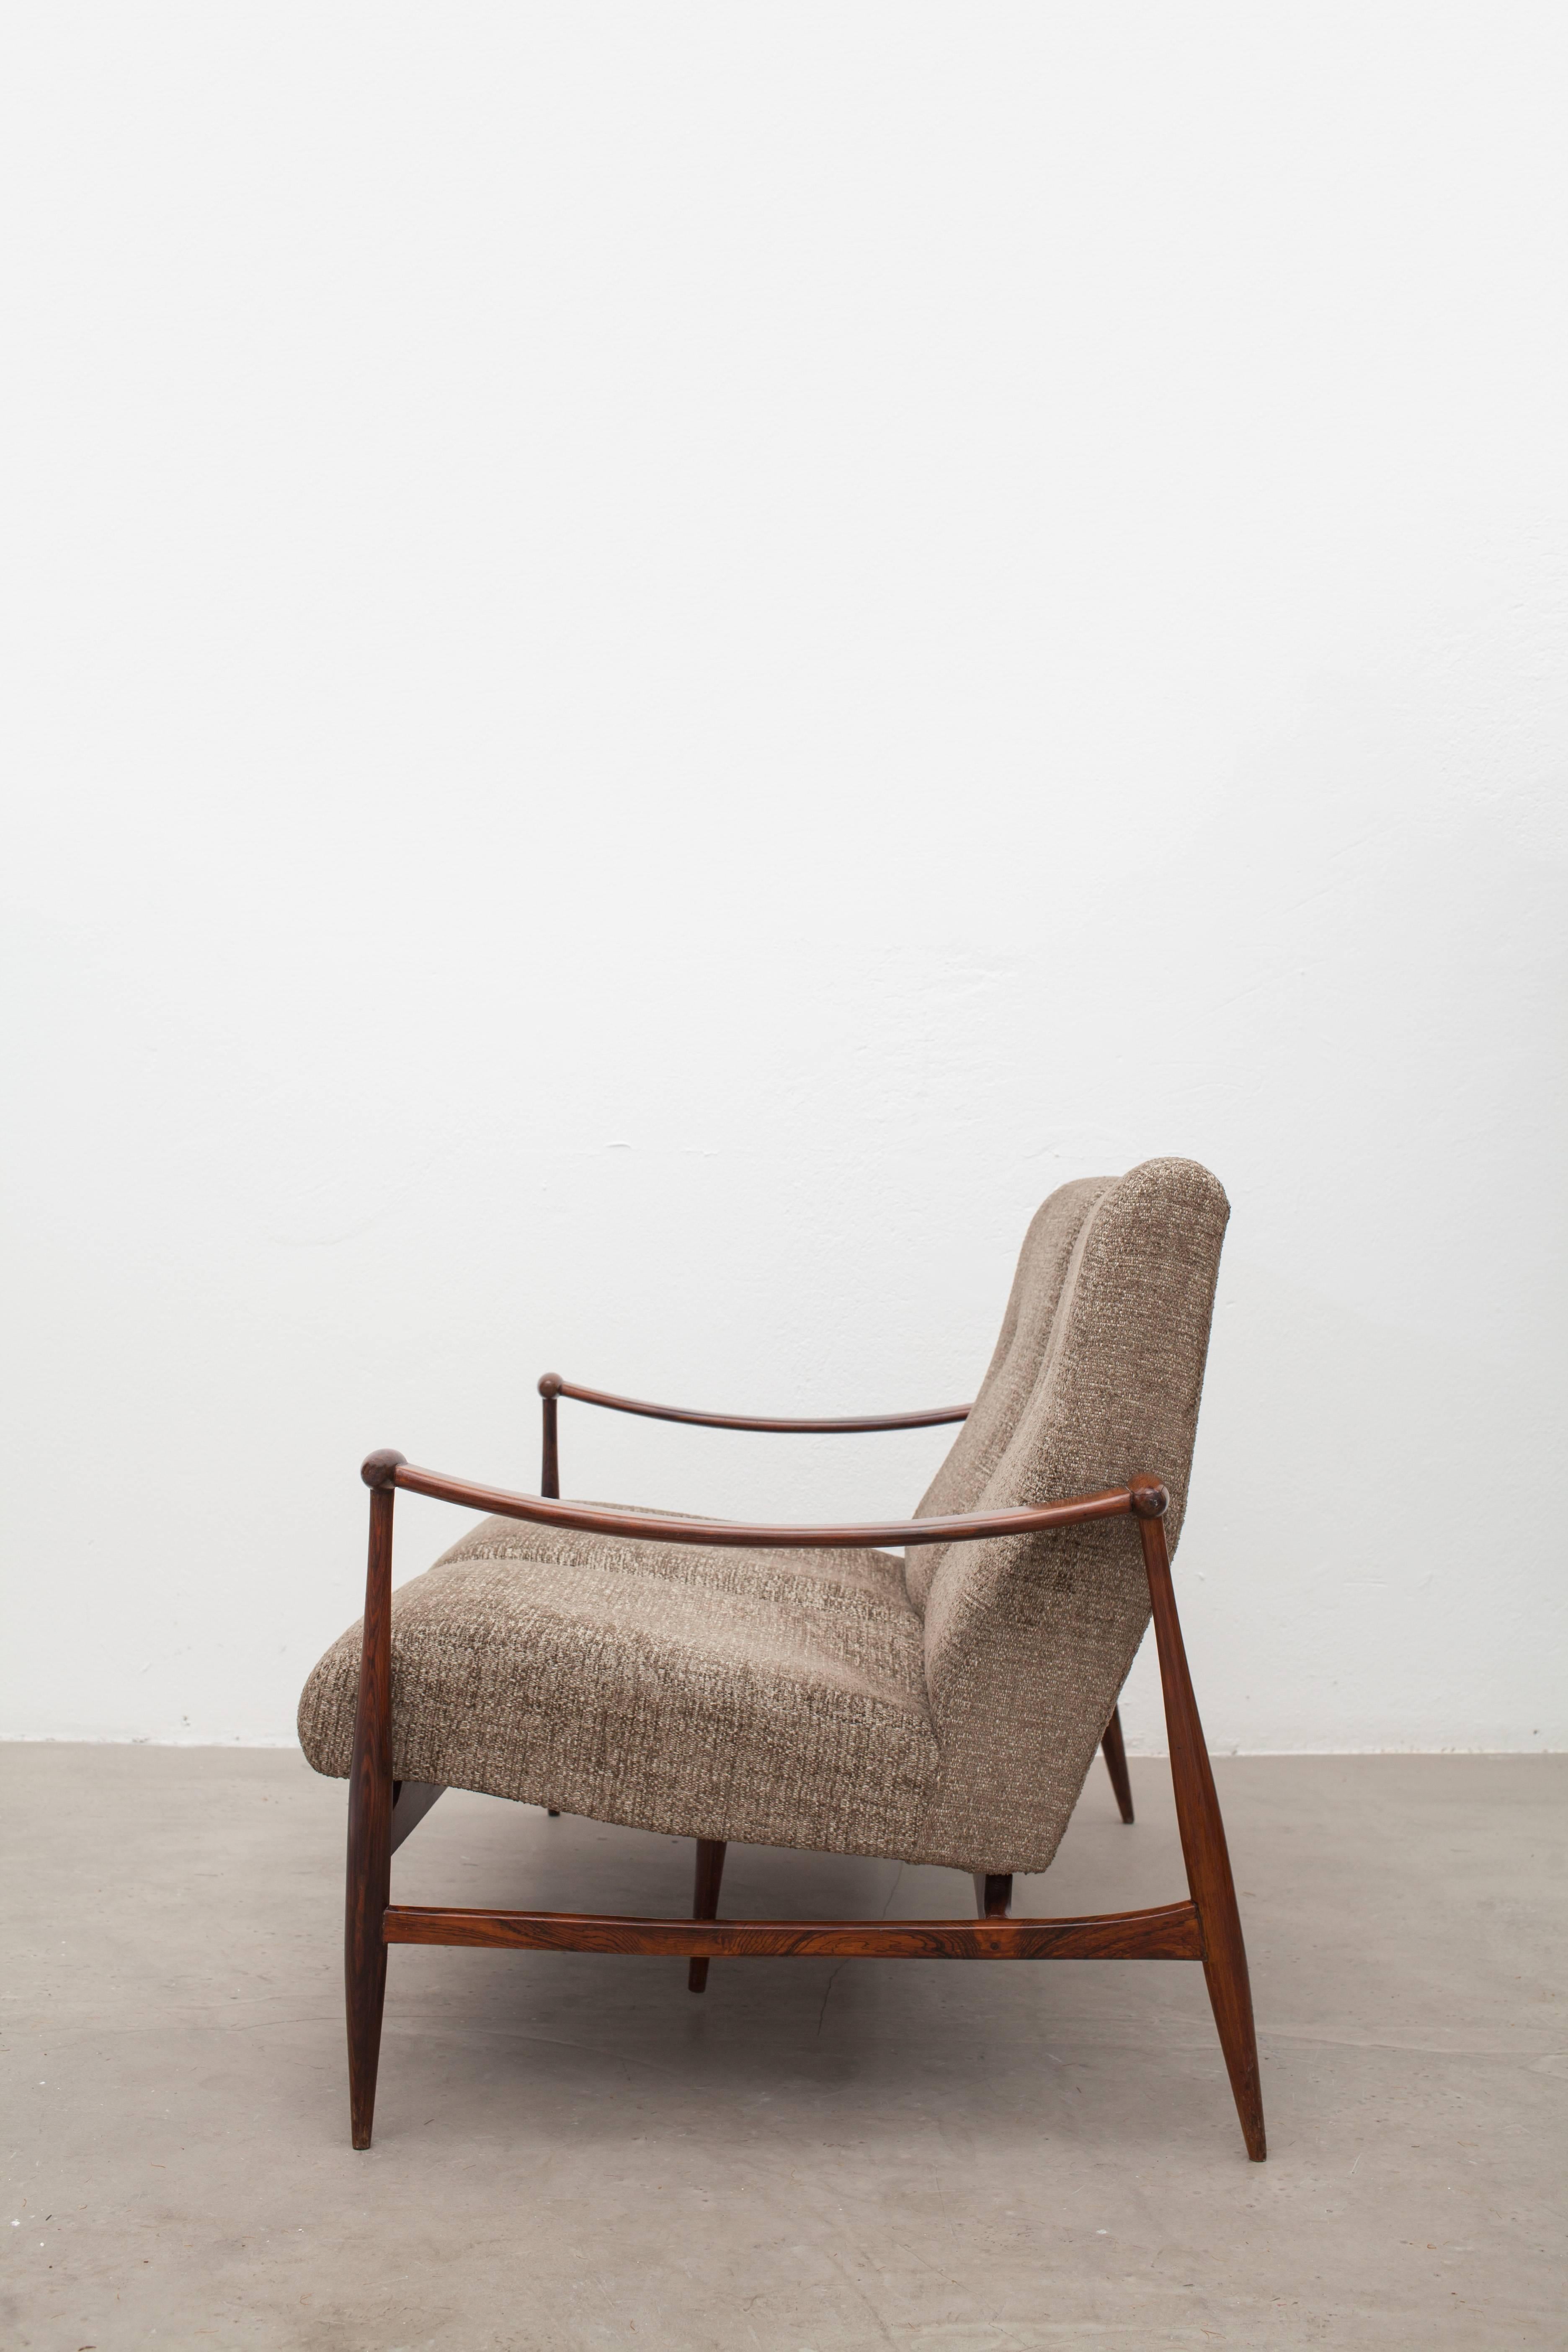 Vintage settee, made in Brazil, circa 1960s.
Frame in jacarandá wood, upholstered in linen.